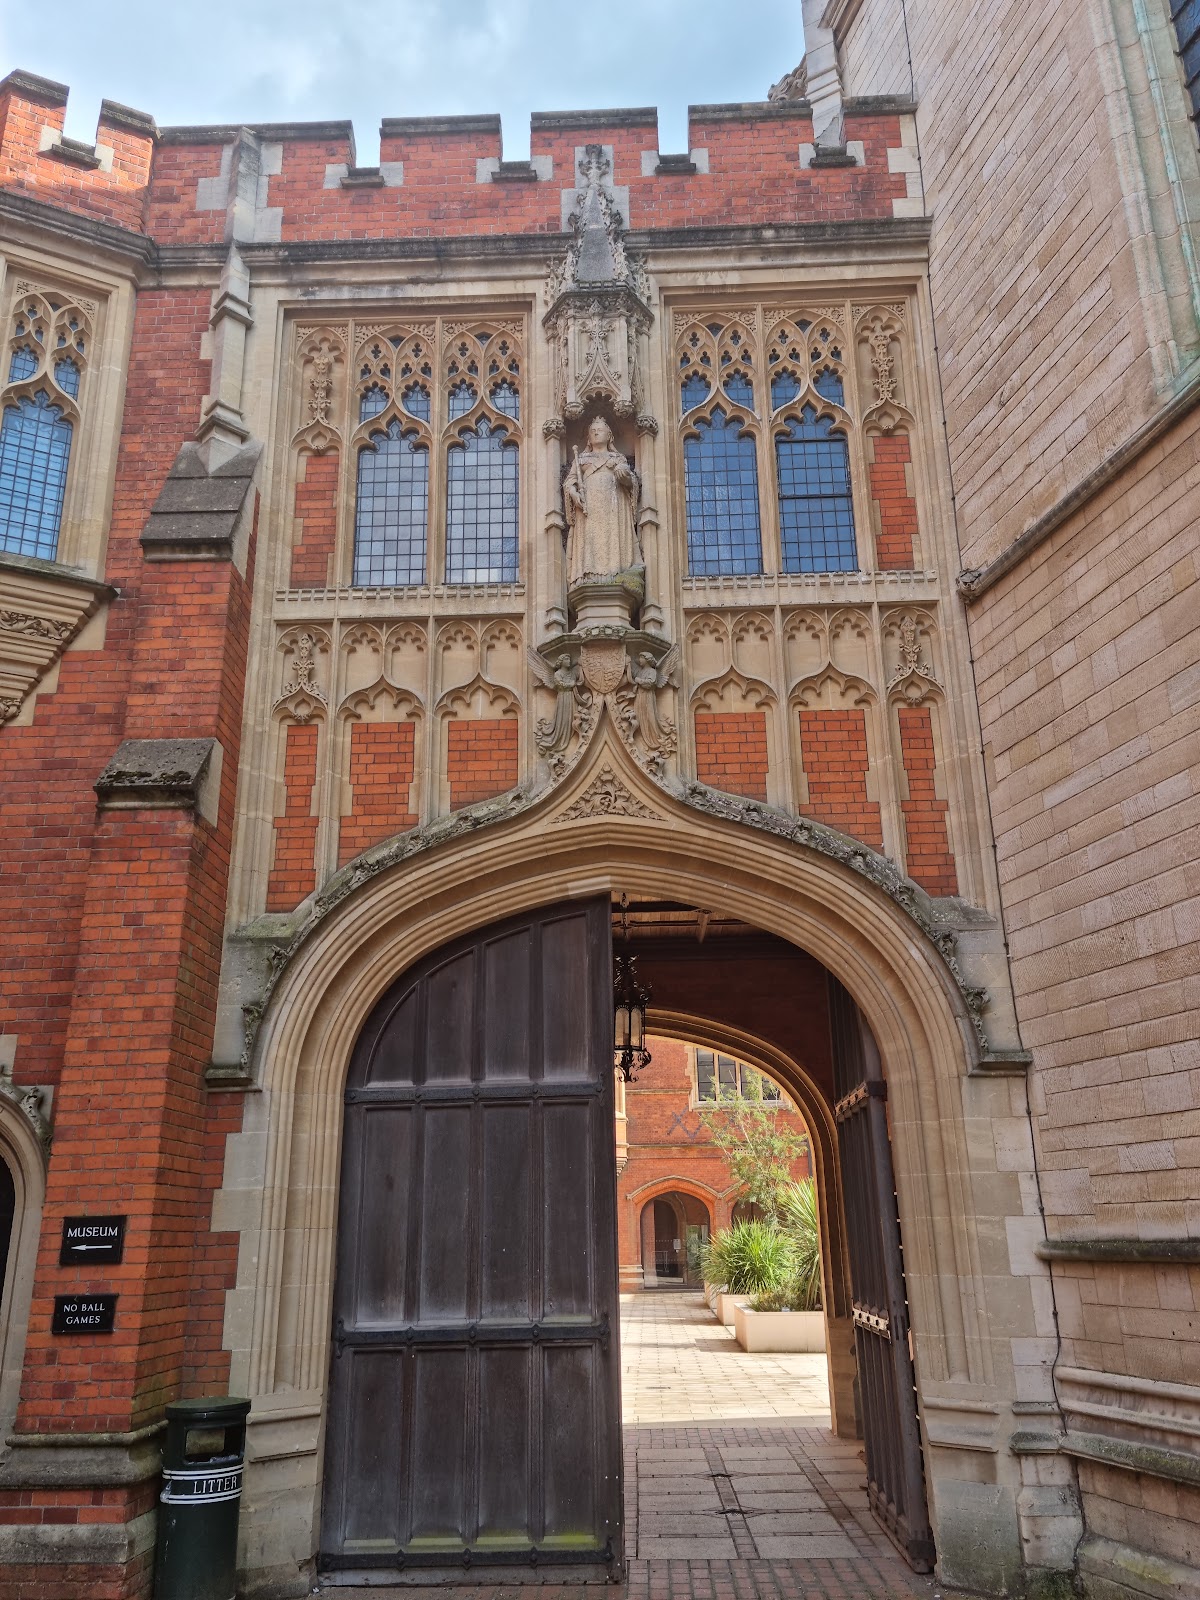 https://whatremovals.co.uk/wp-content/uploads/2022/02/Eton College Natural History Museum-225x300.jpeg